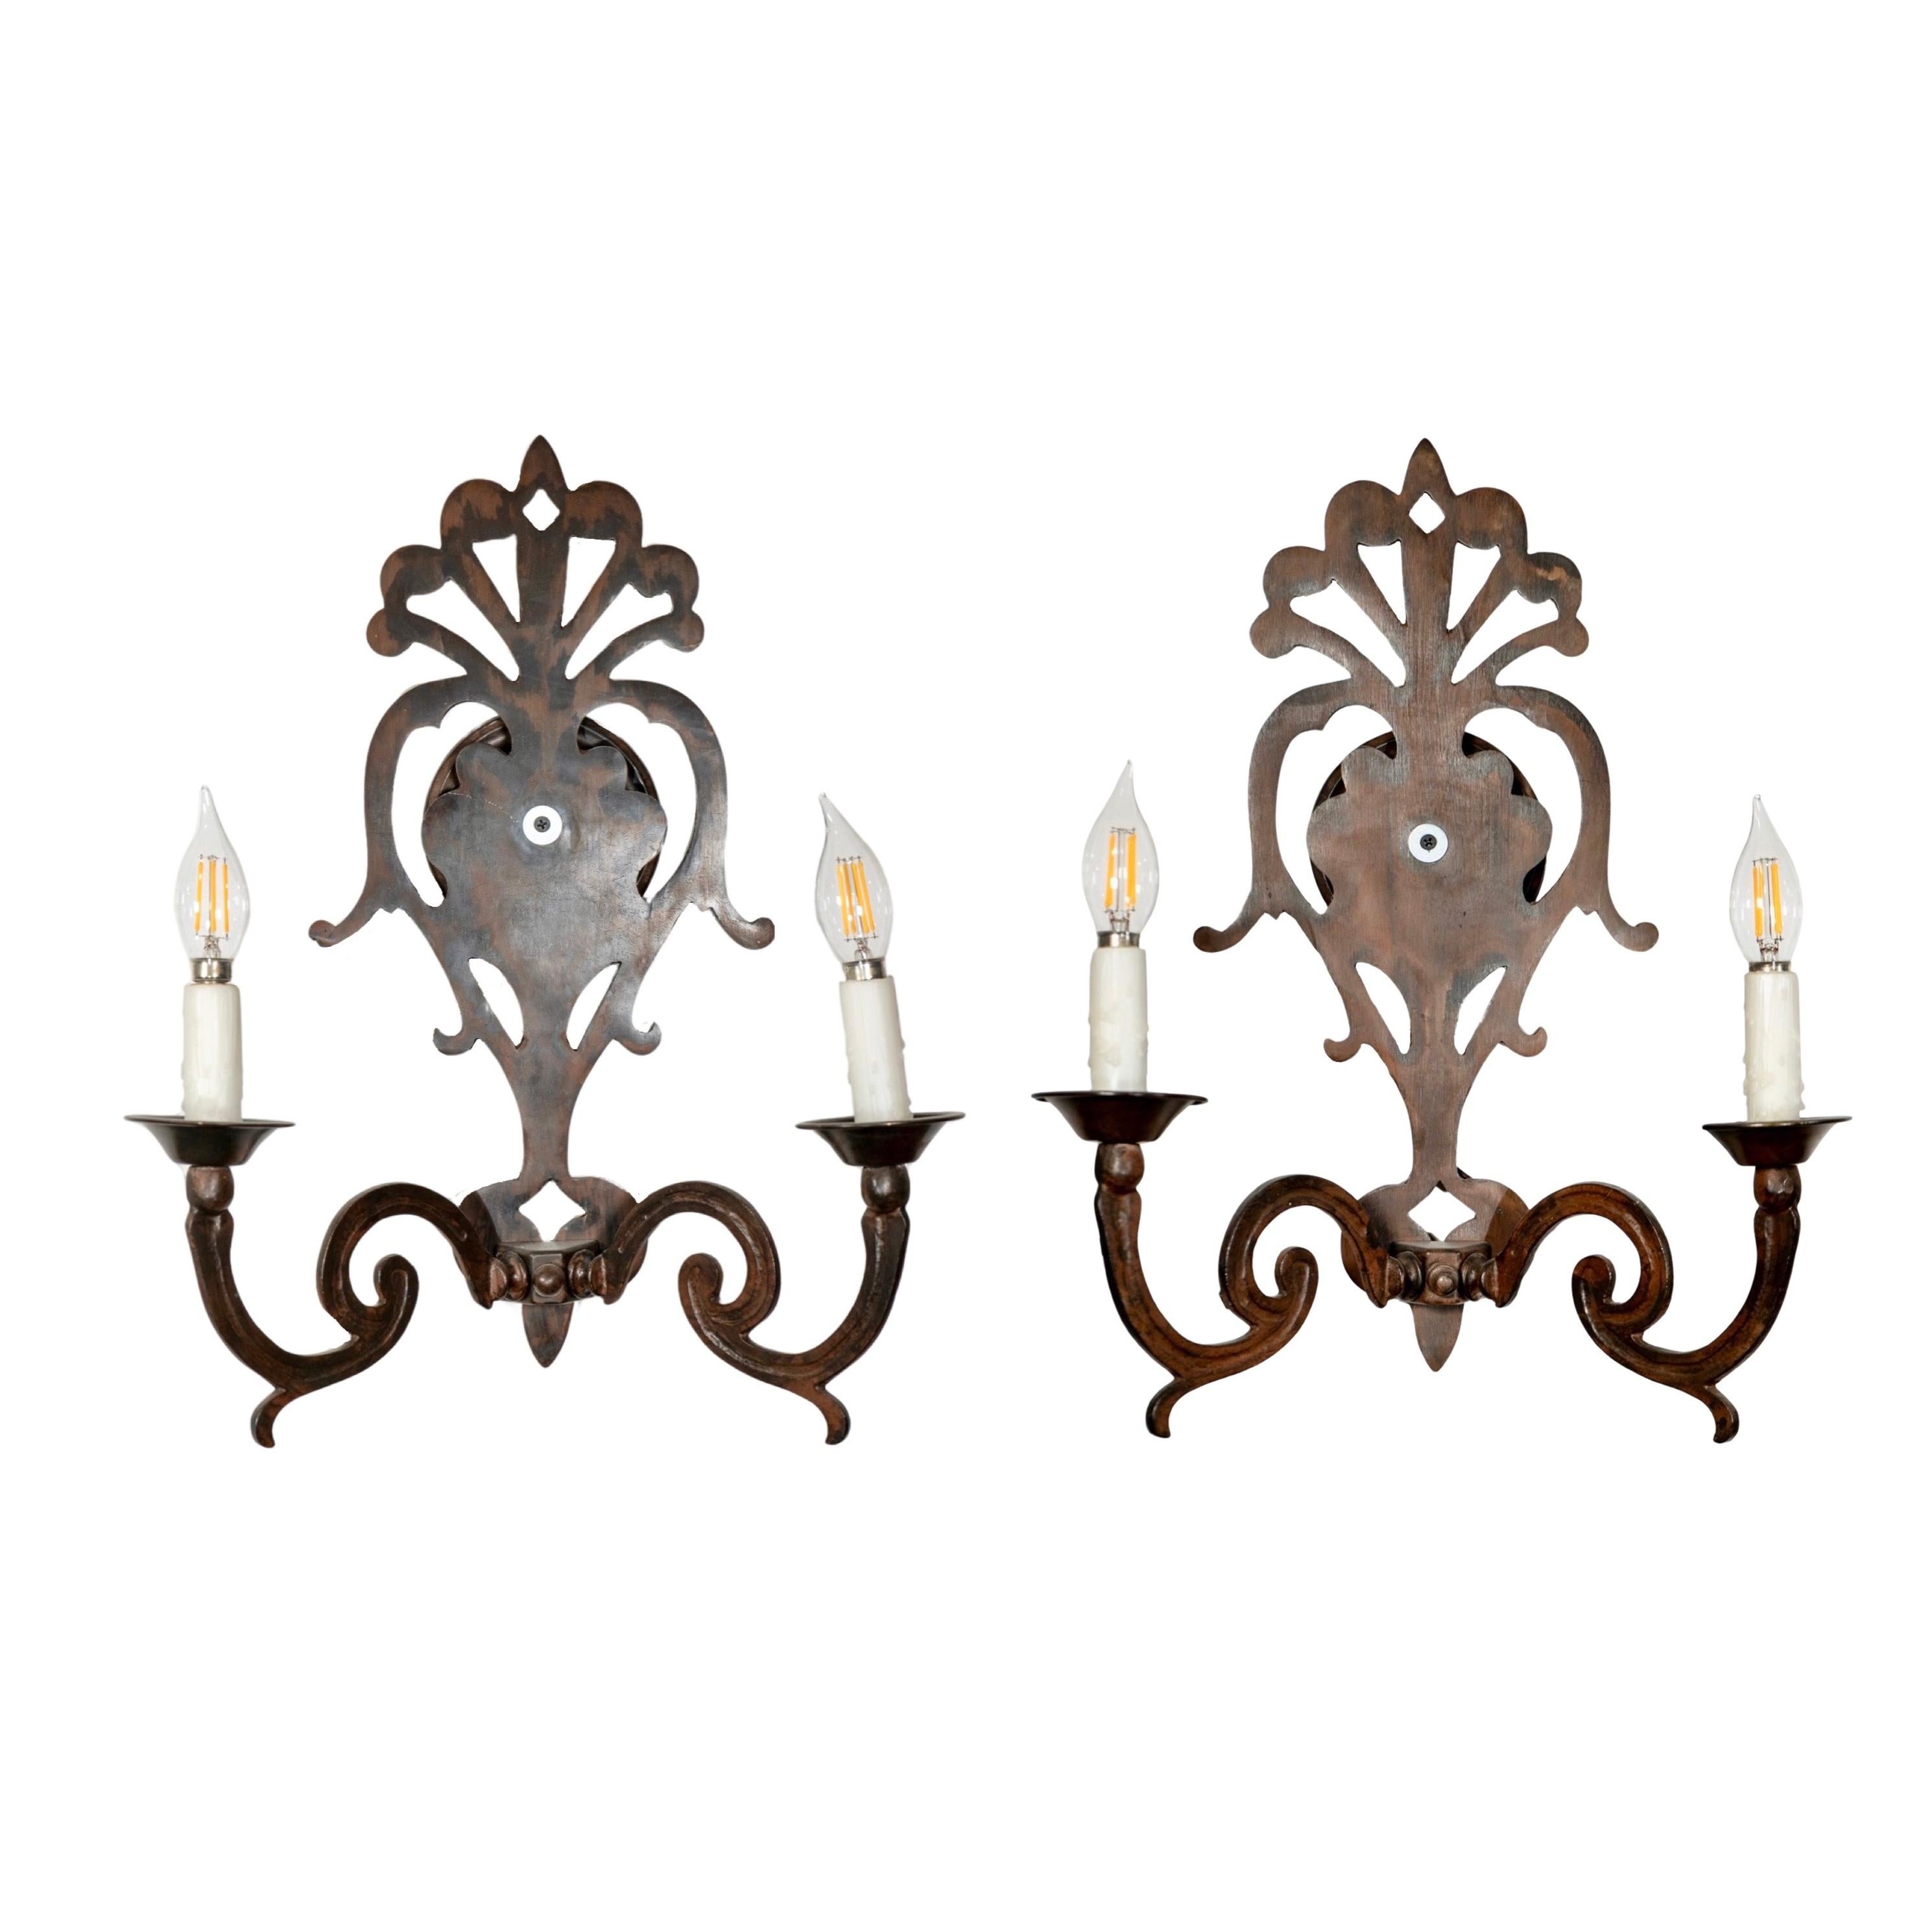 Add a touch of classic elegance to your home with this pair of iron wall sconces. Made in France during the mid-century, these pre-wired sconces are perfect for illuminating any room. Sold as a pair, they are a timeless addition to any decor.